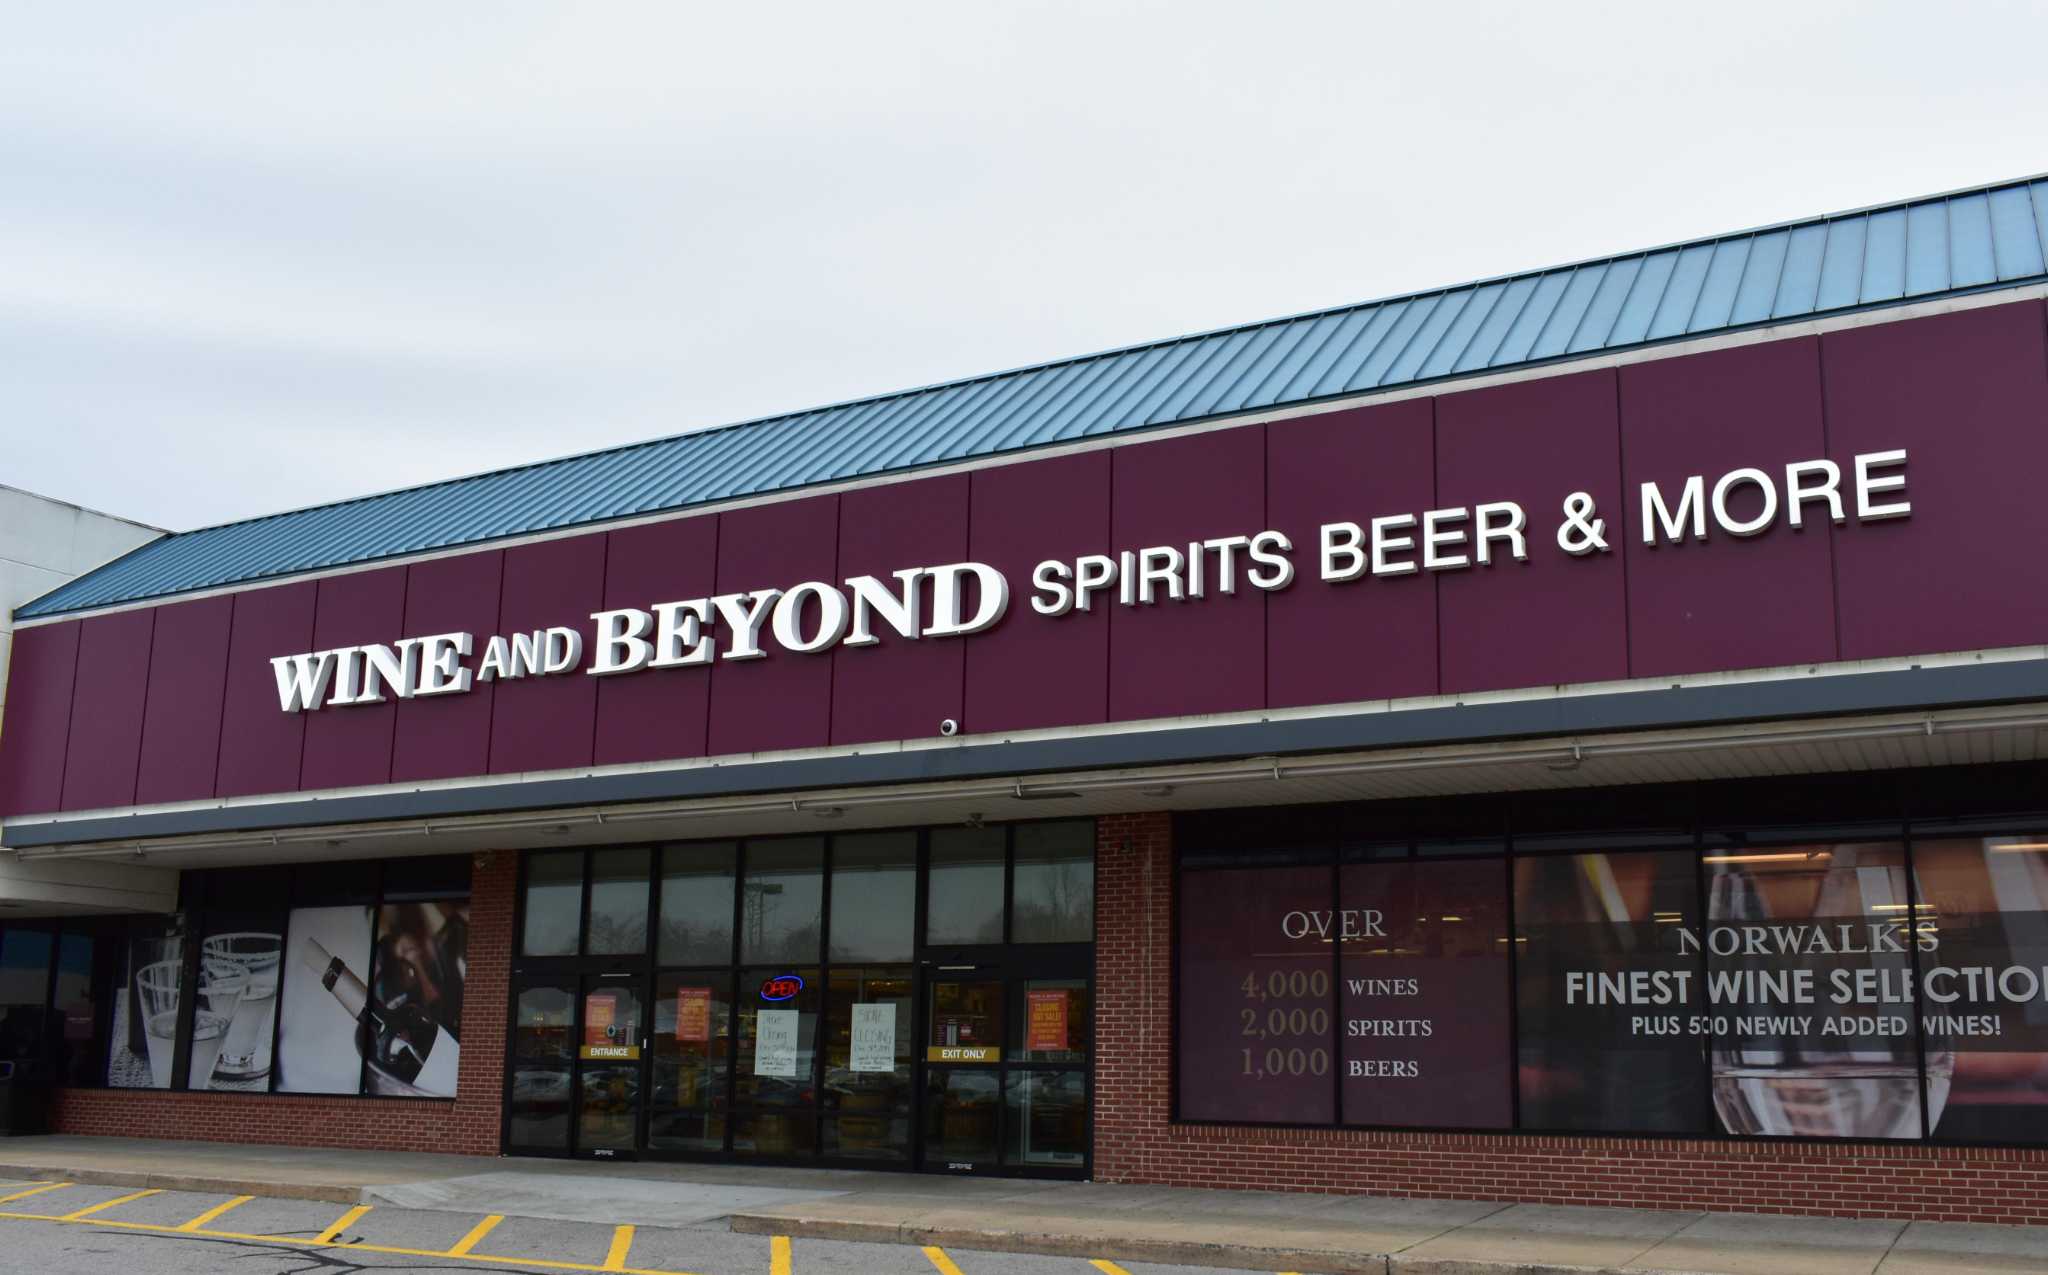 Planet Fitness To Replace Closing Wine Store In Norwalk